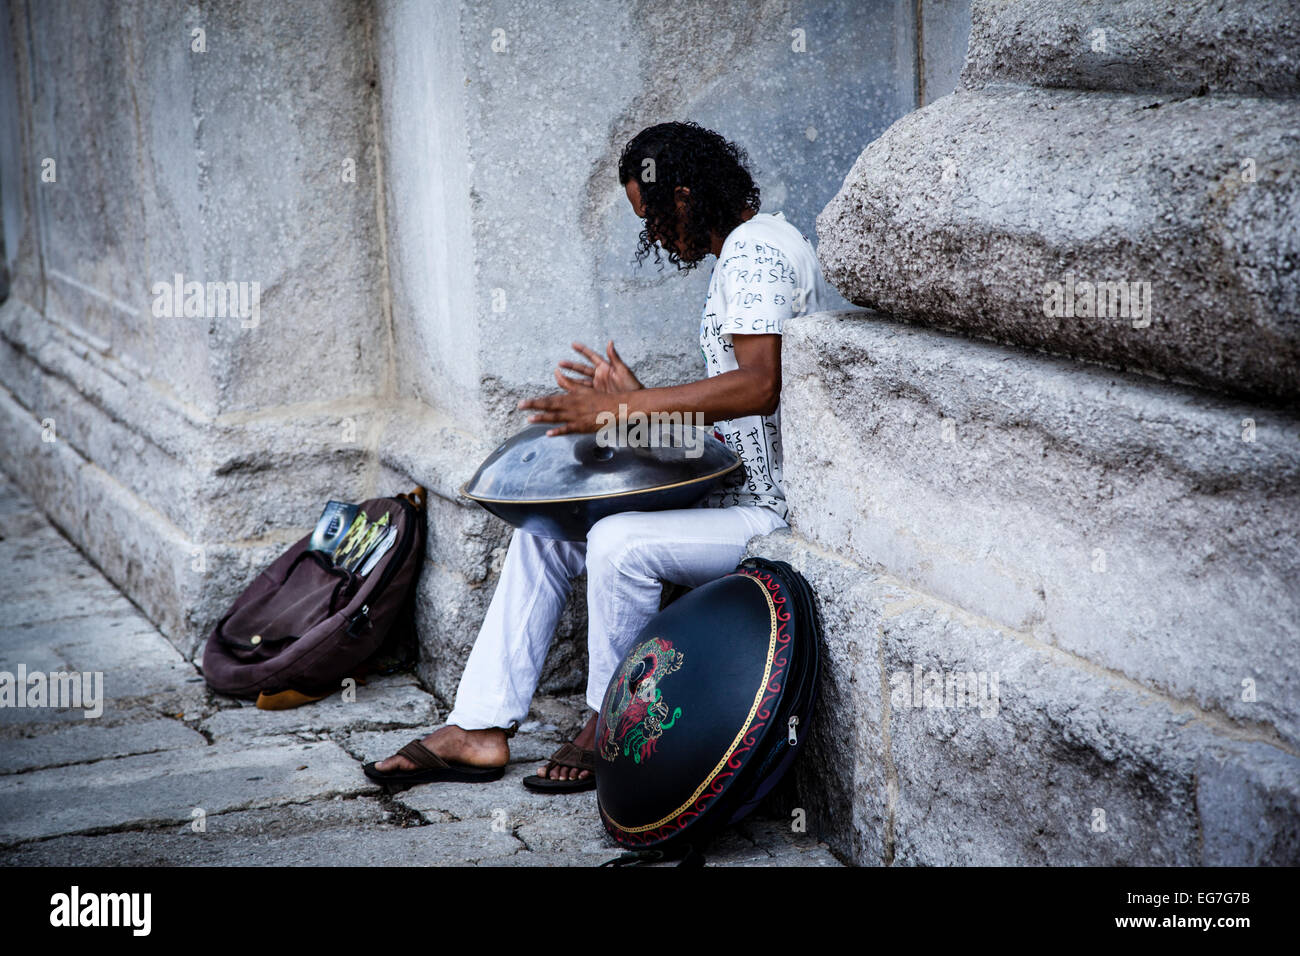 Street musician playing idiophone musical instrument named Hang Stock Photo